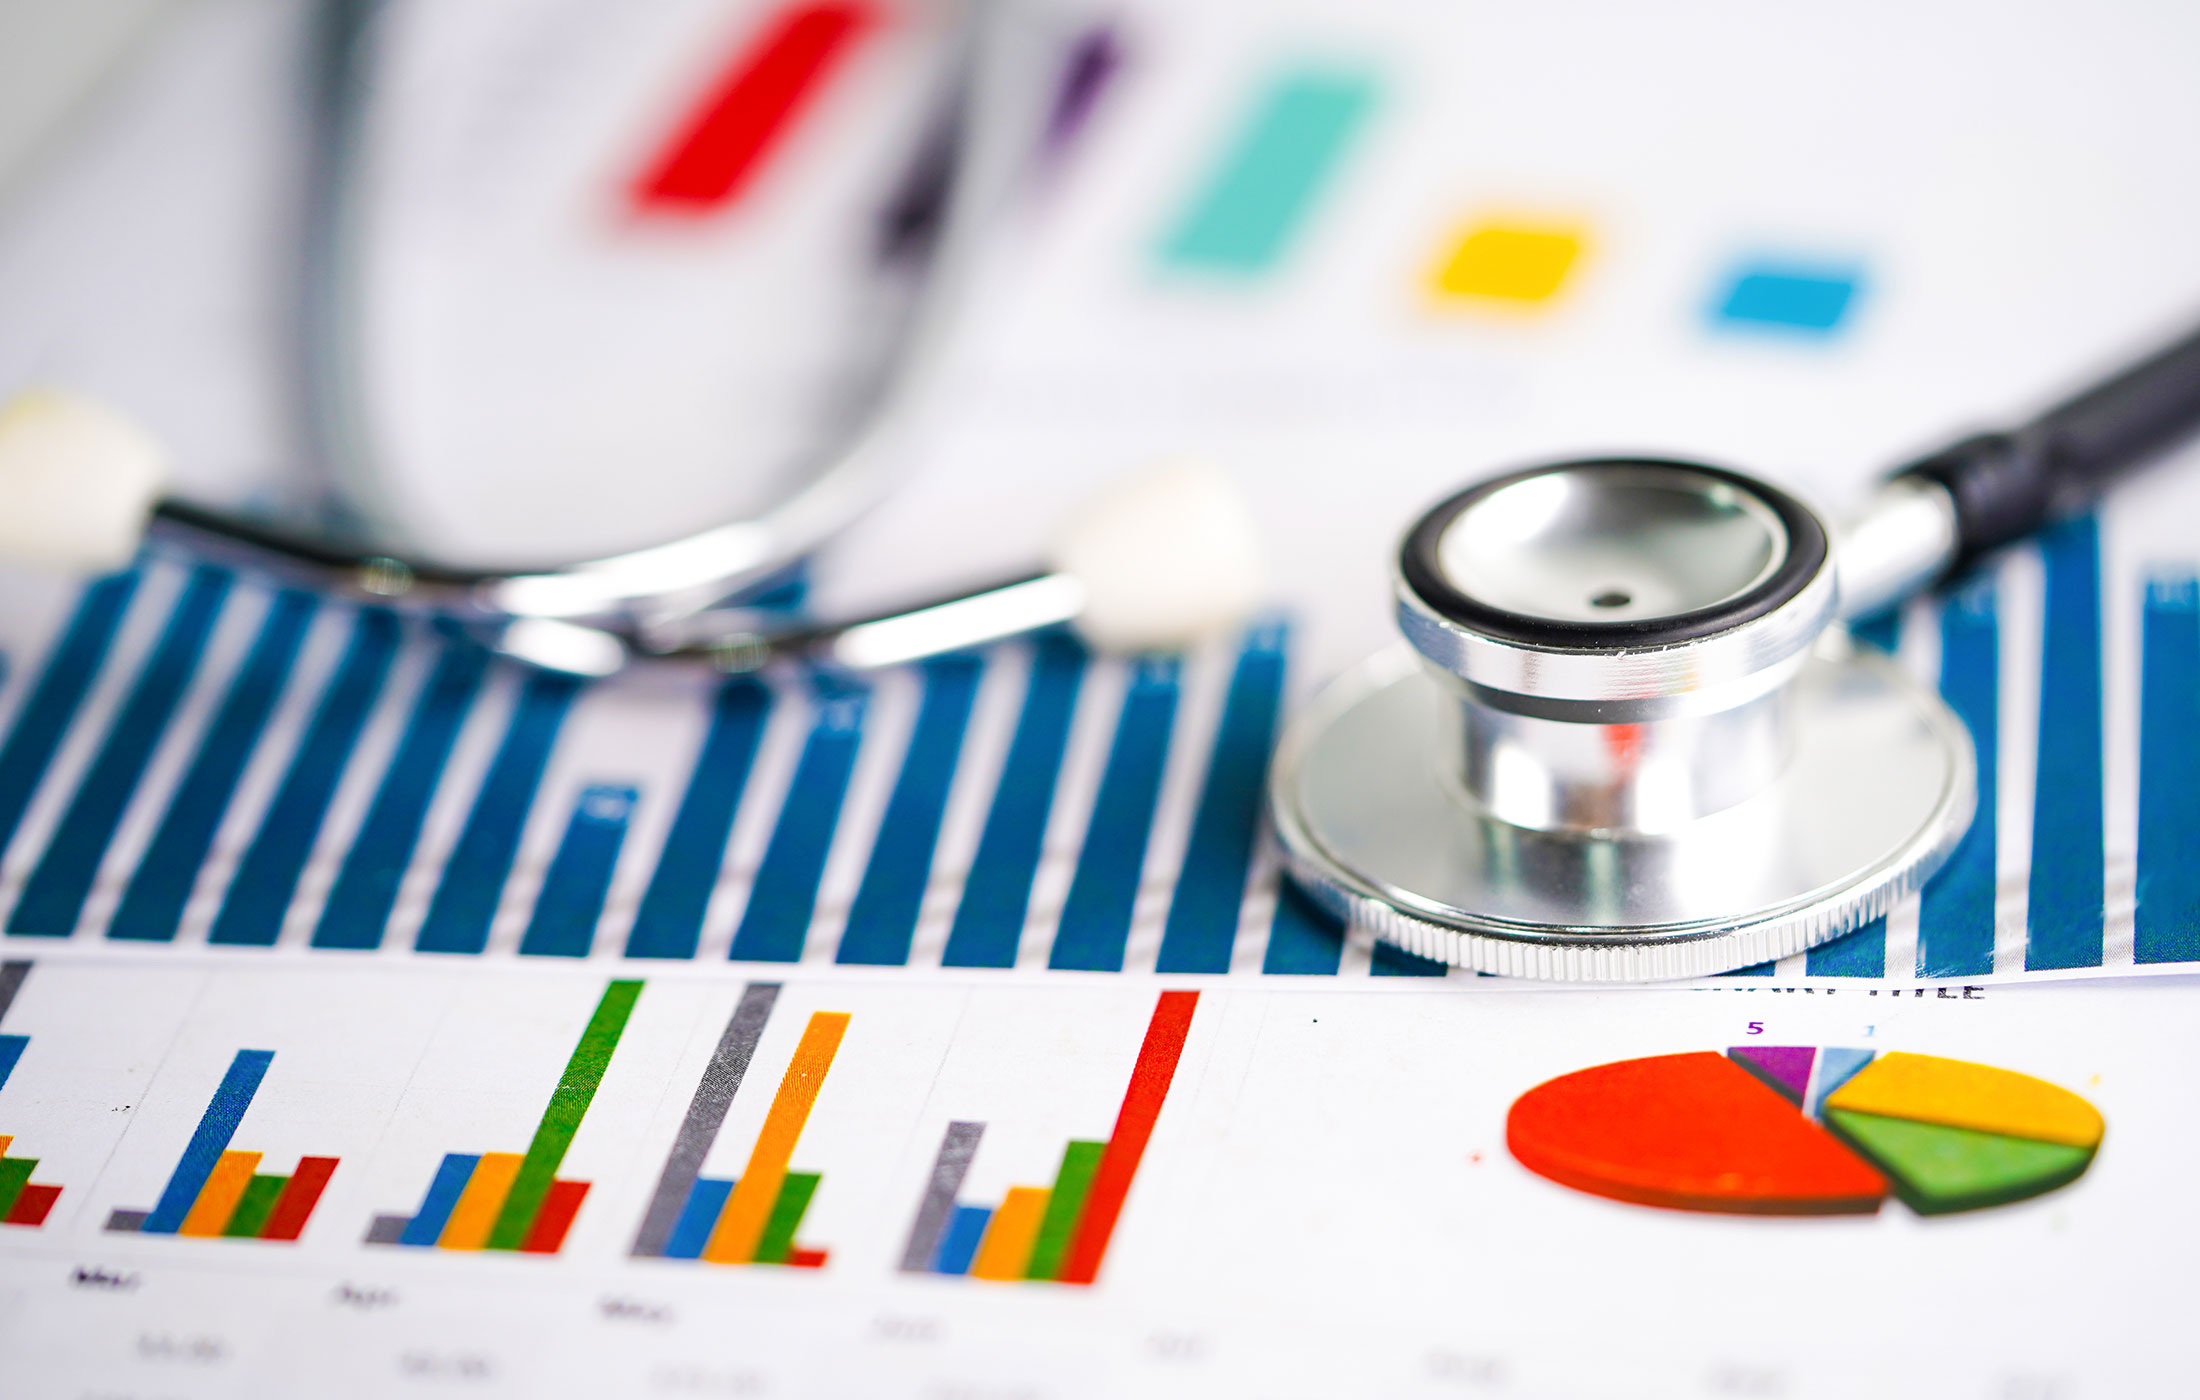 Global Healthcare Analytics/Medical Analytics Market 2020 Share, Growth Forecast, Industry Outlook 2025